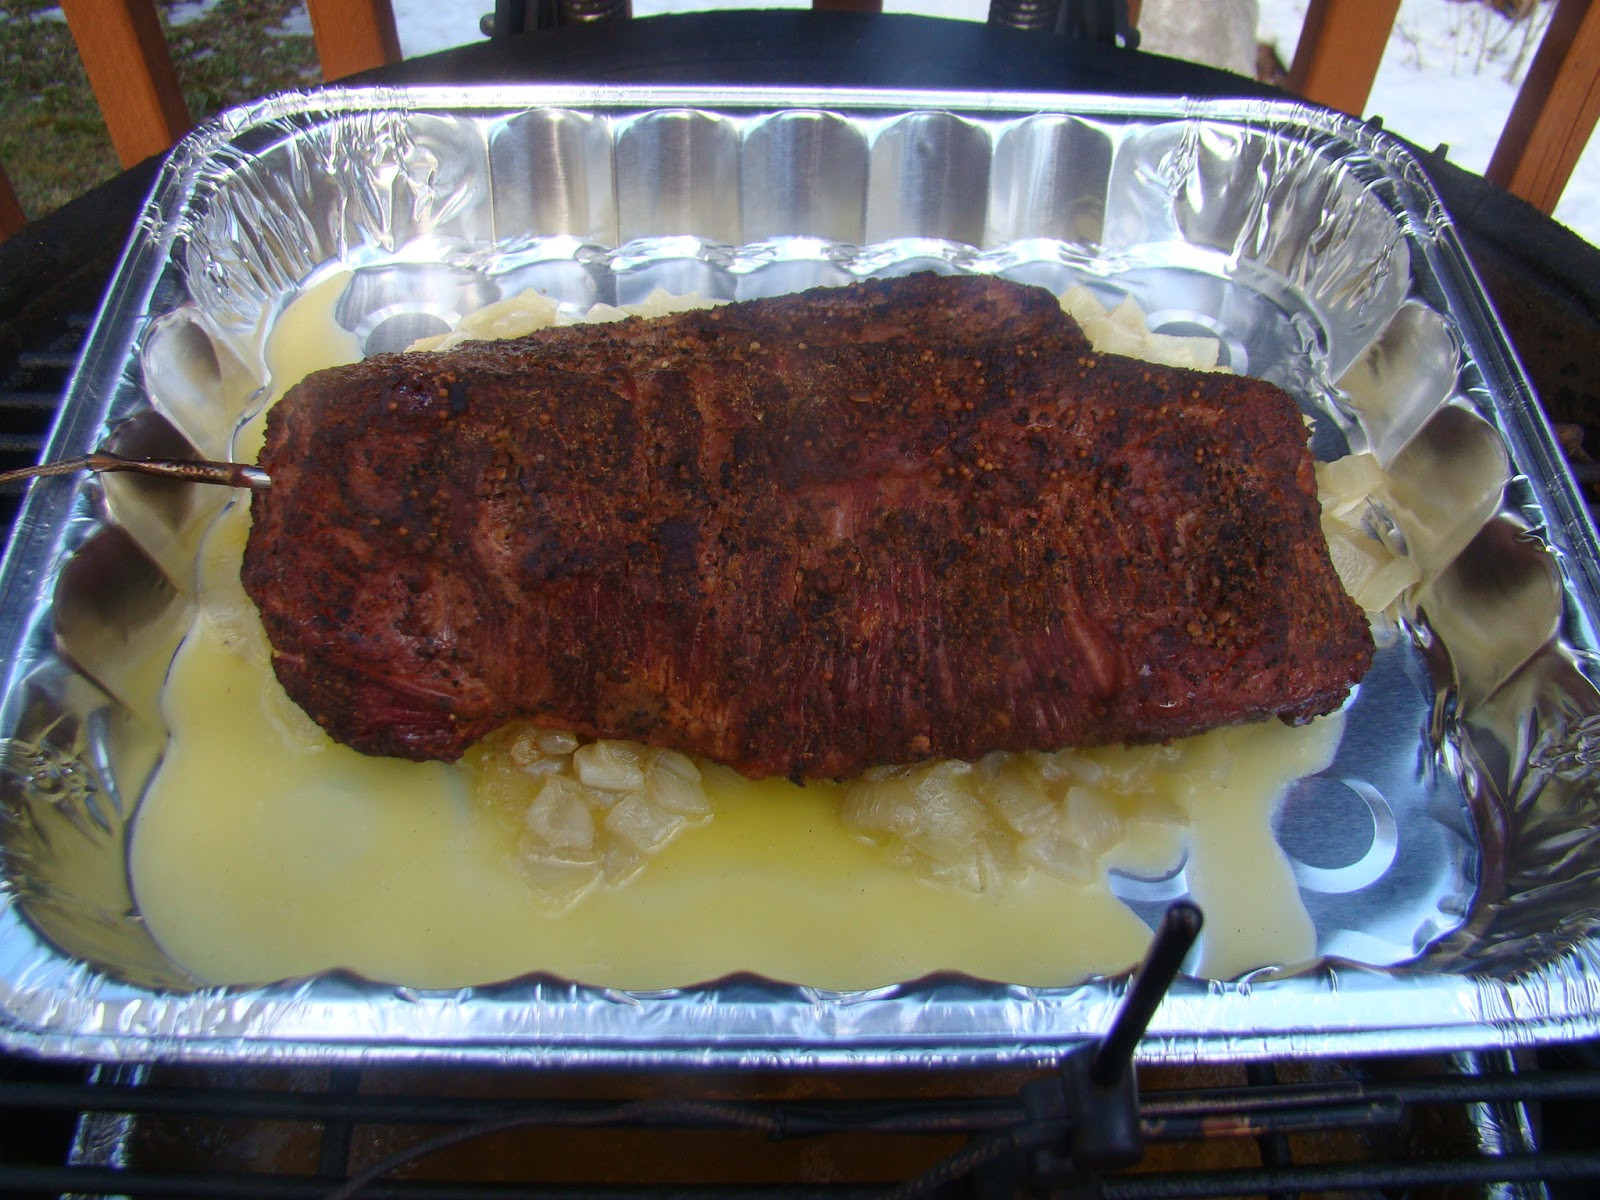 Corned Beef Brisket On The Grill
 HRM CREATIVE BBQ Corn Beef Brisket on the grill recipe